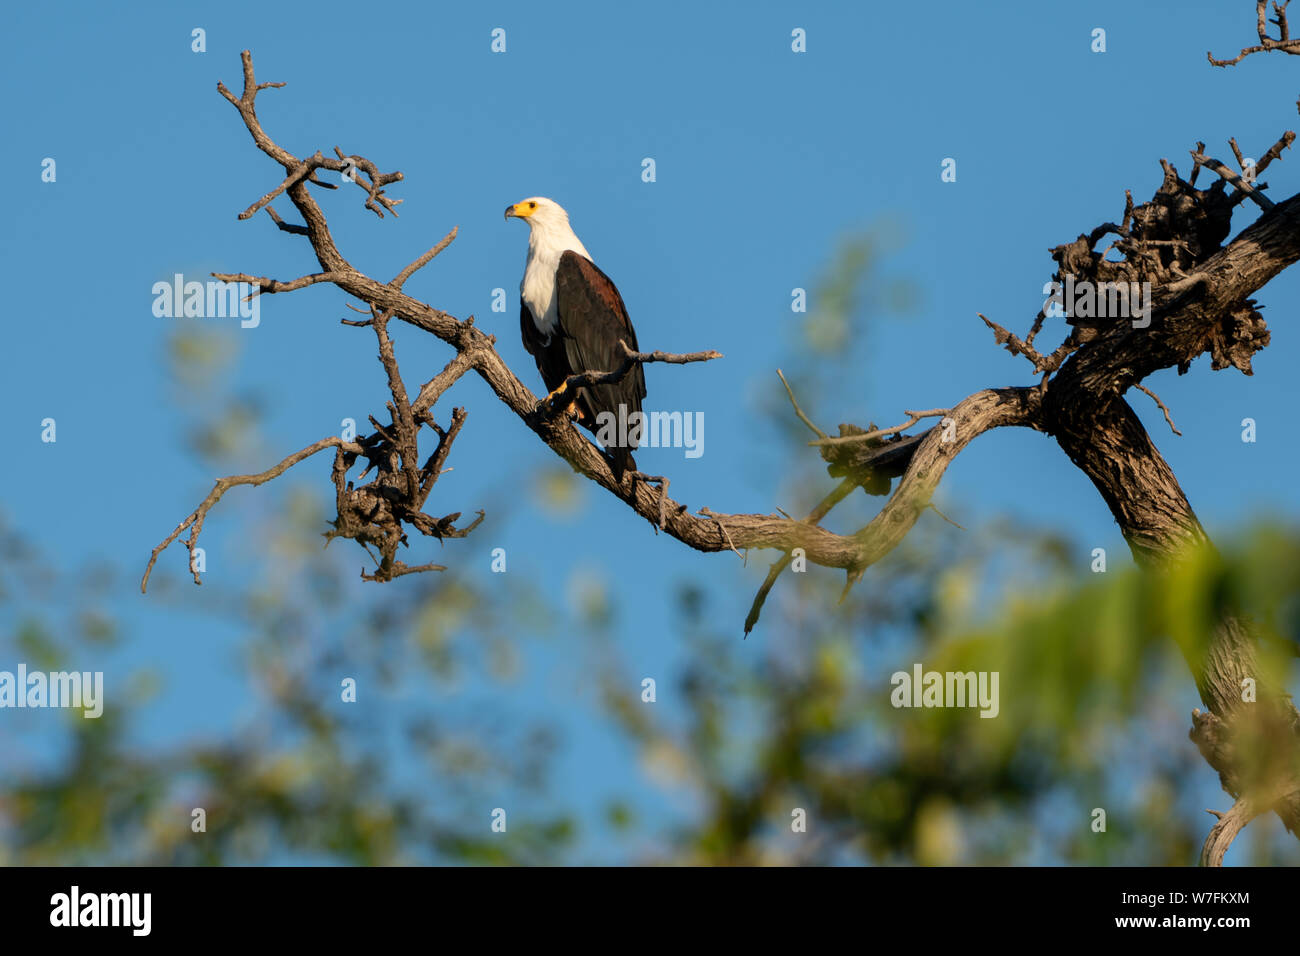 African fish eagle (Haliaeetus vocifer) perched on a tree. This bird is found in sub-Saharan Africa near water. The female, the larger of the sexes, h Stock Photo